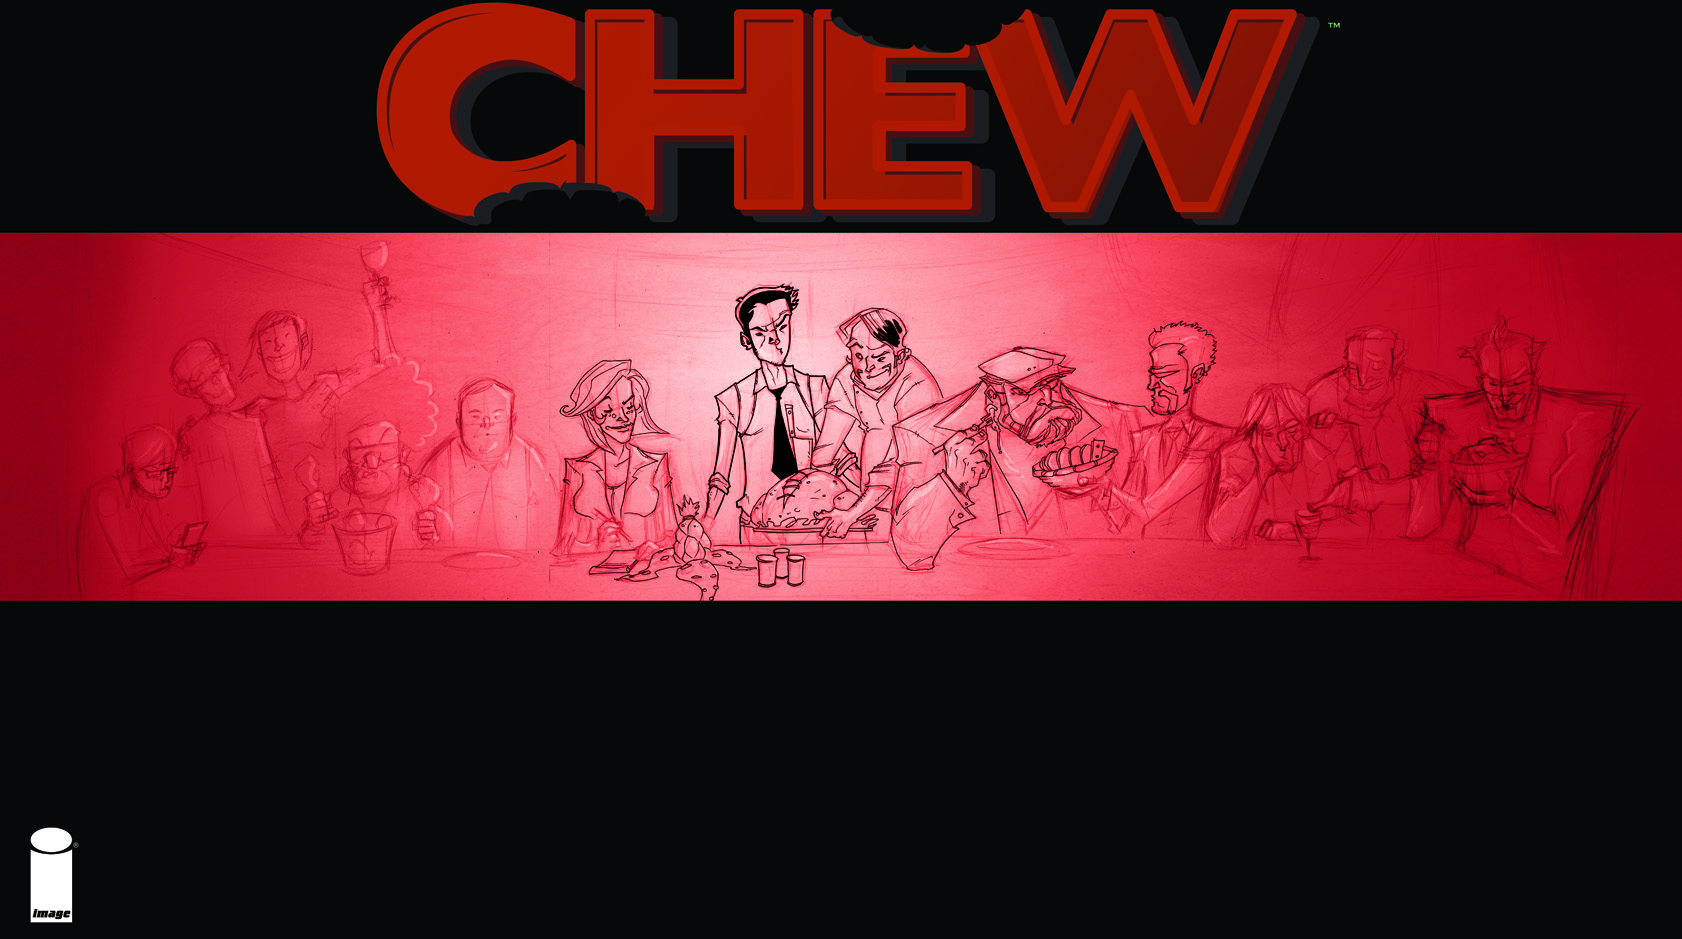 https://www.entertainmentfuse.com/images/CHEW 15 press release.jpg